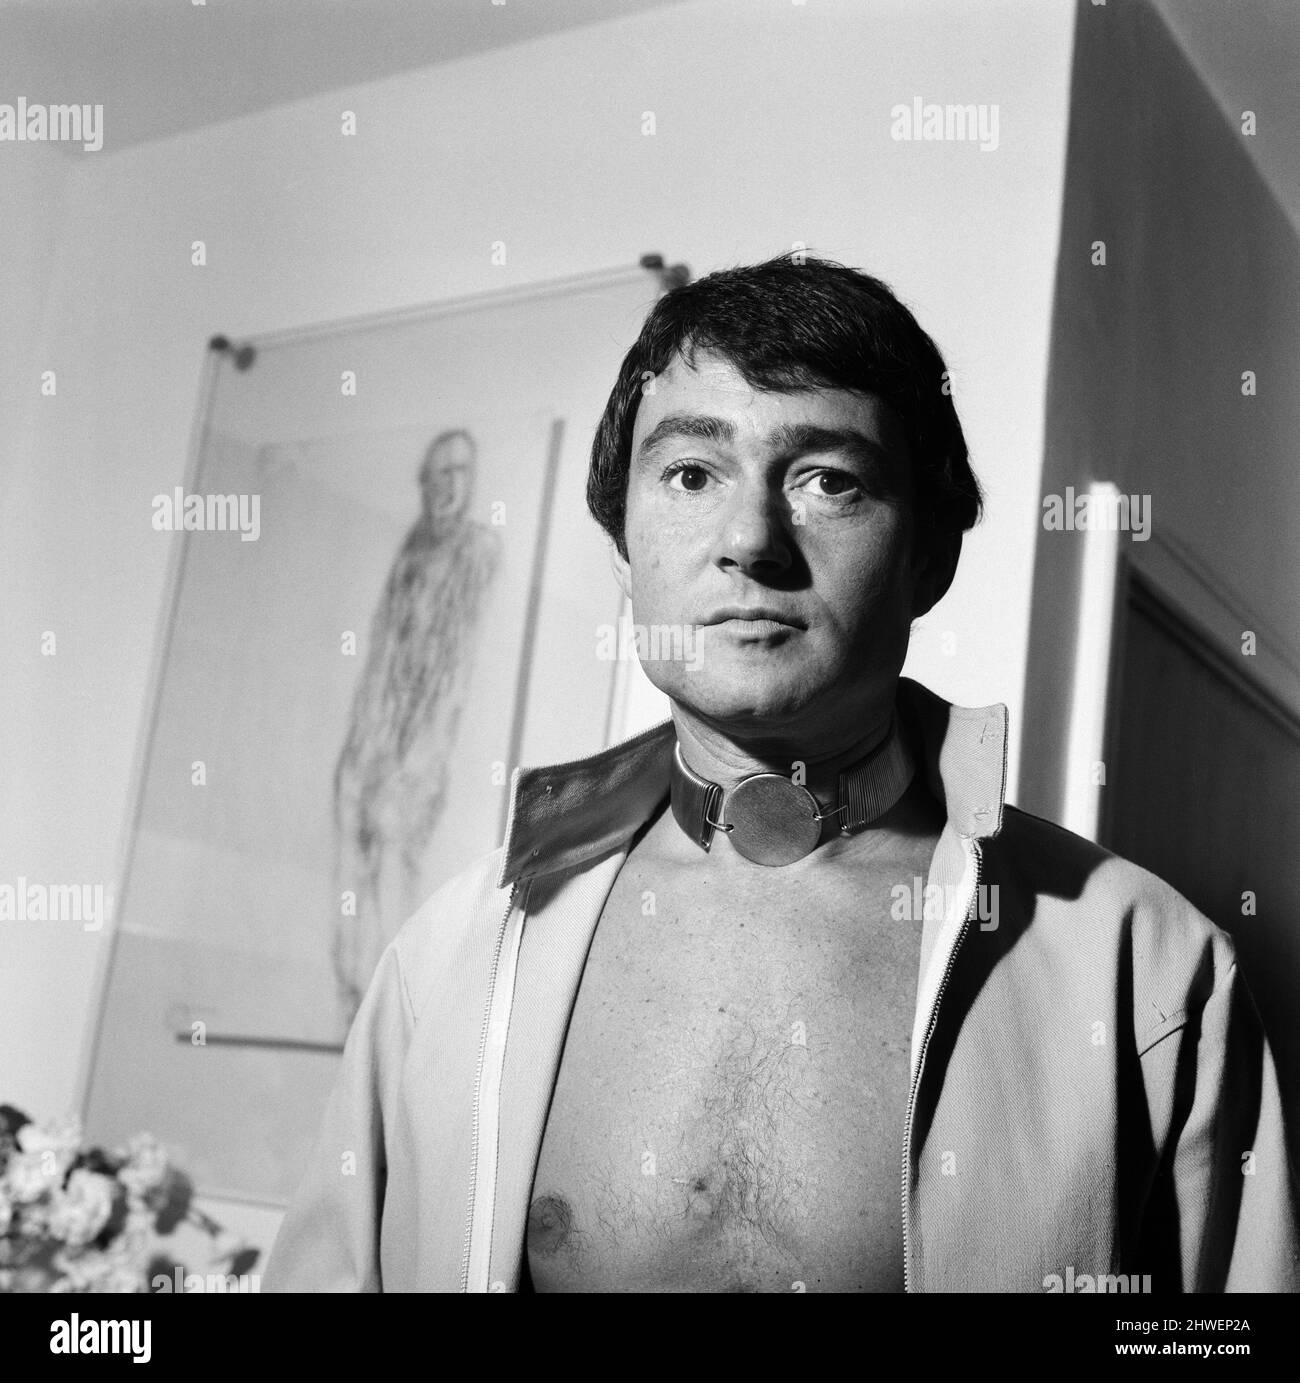 Hairstylist Vidal Sassoon, pictured in his flat. 27th August 1969. Stock Photo